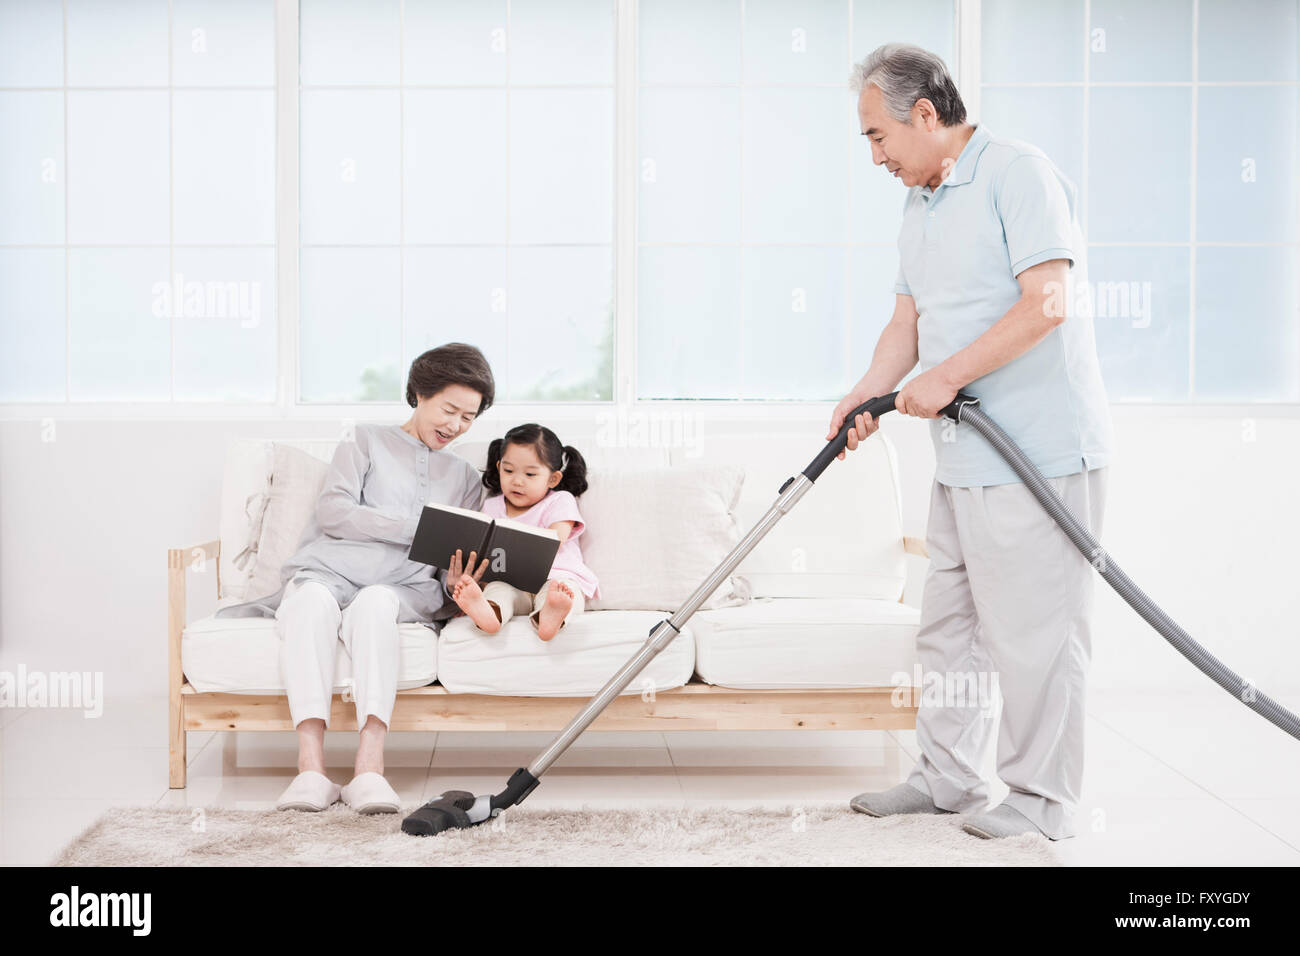 Senior woman seated on a couch and reading a book with her granddaughter and her husband vacuuming on the floor Stock Photo